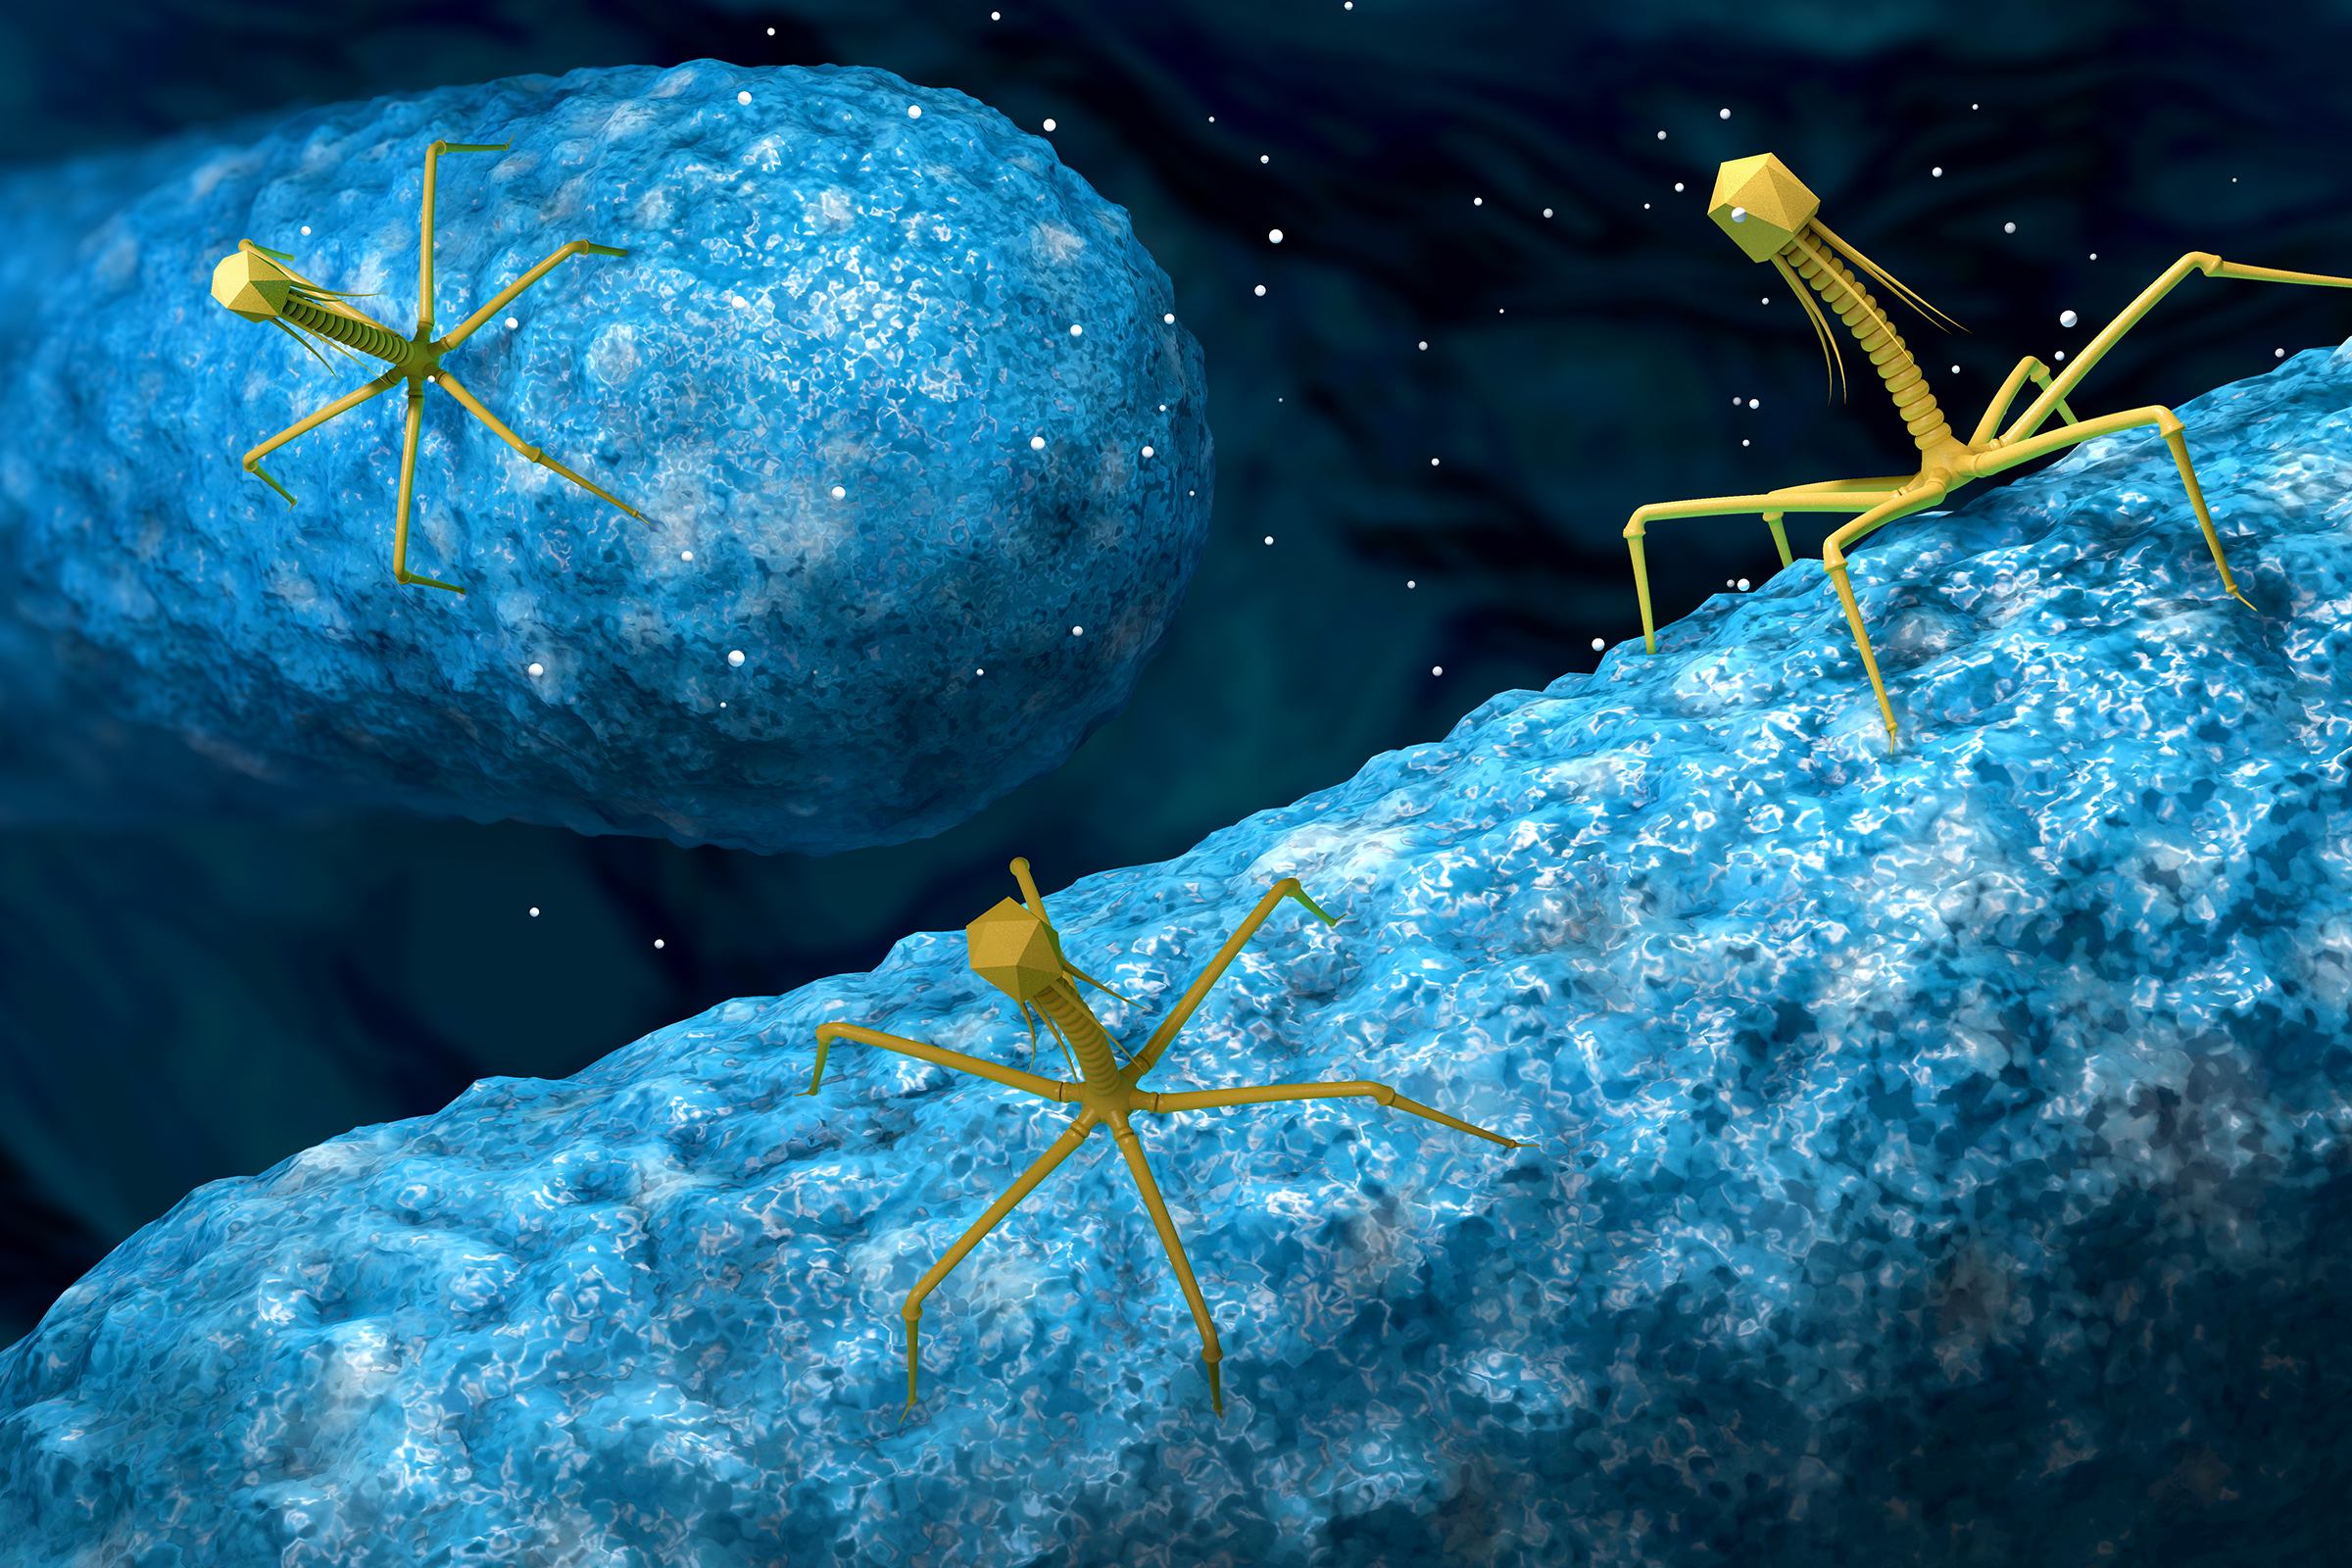 Bacteriophage or phage virus attacking and infecting a bacteria - 3d illustration